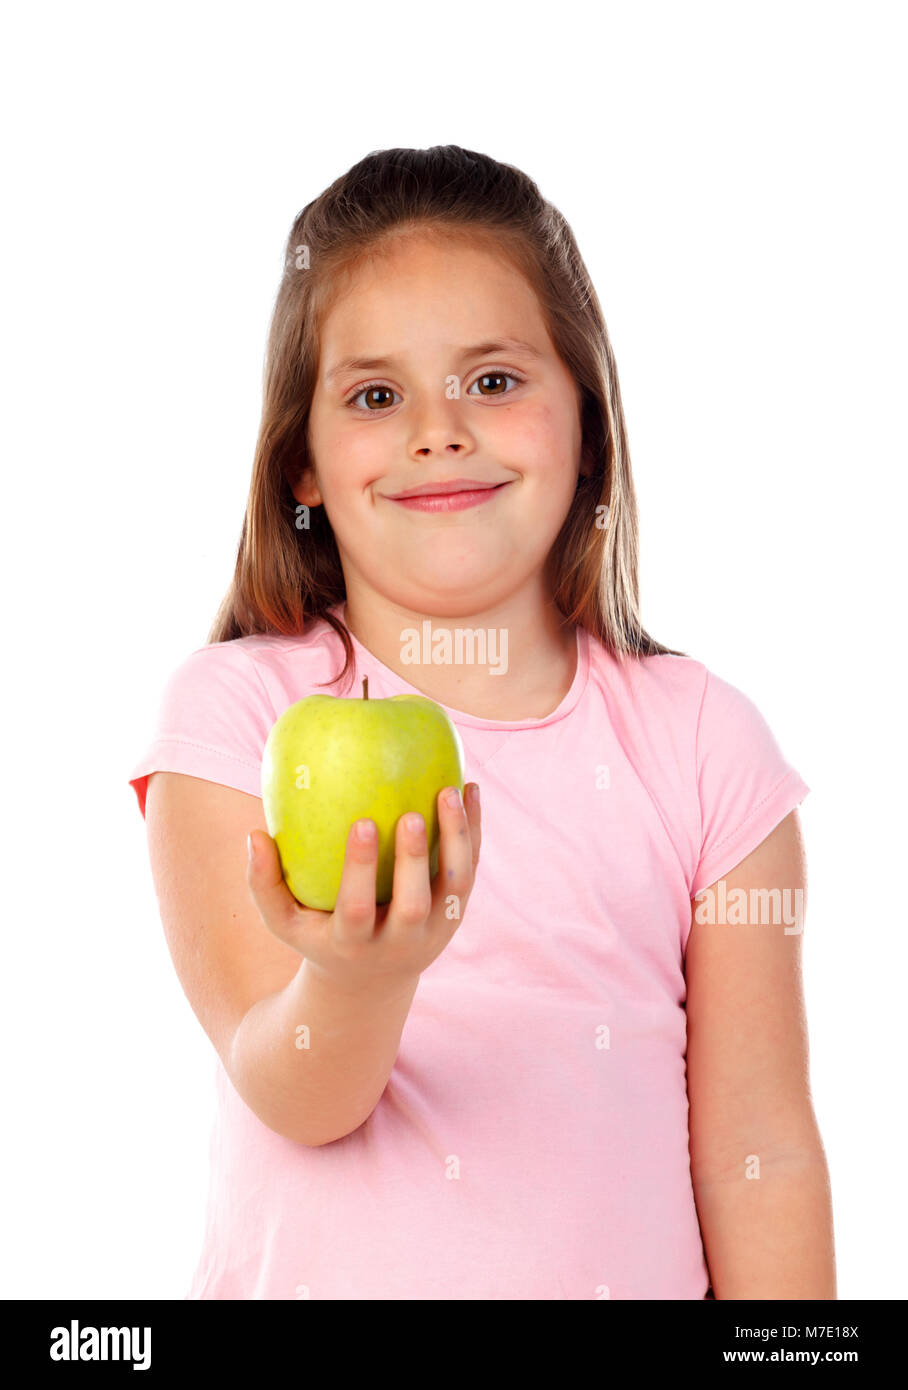 Girl with a yellow apple isolated on a white background Stock Photo